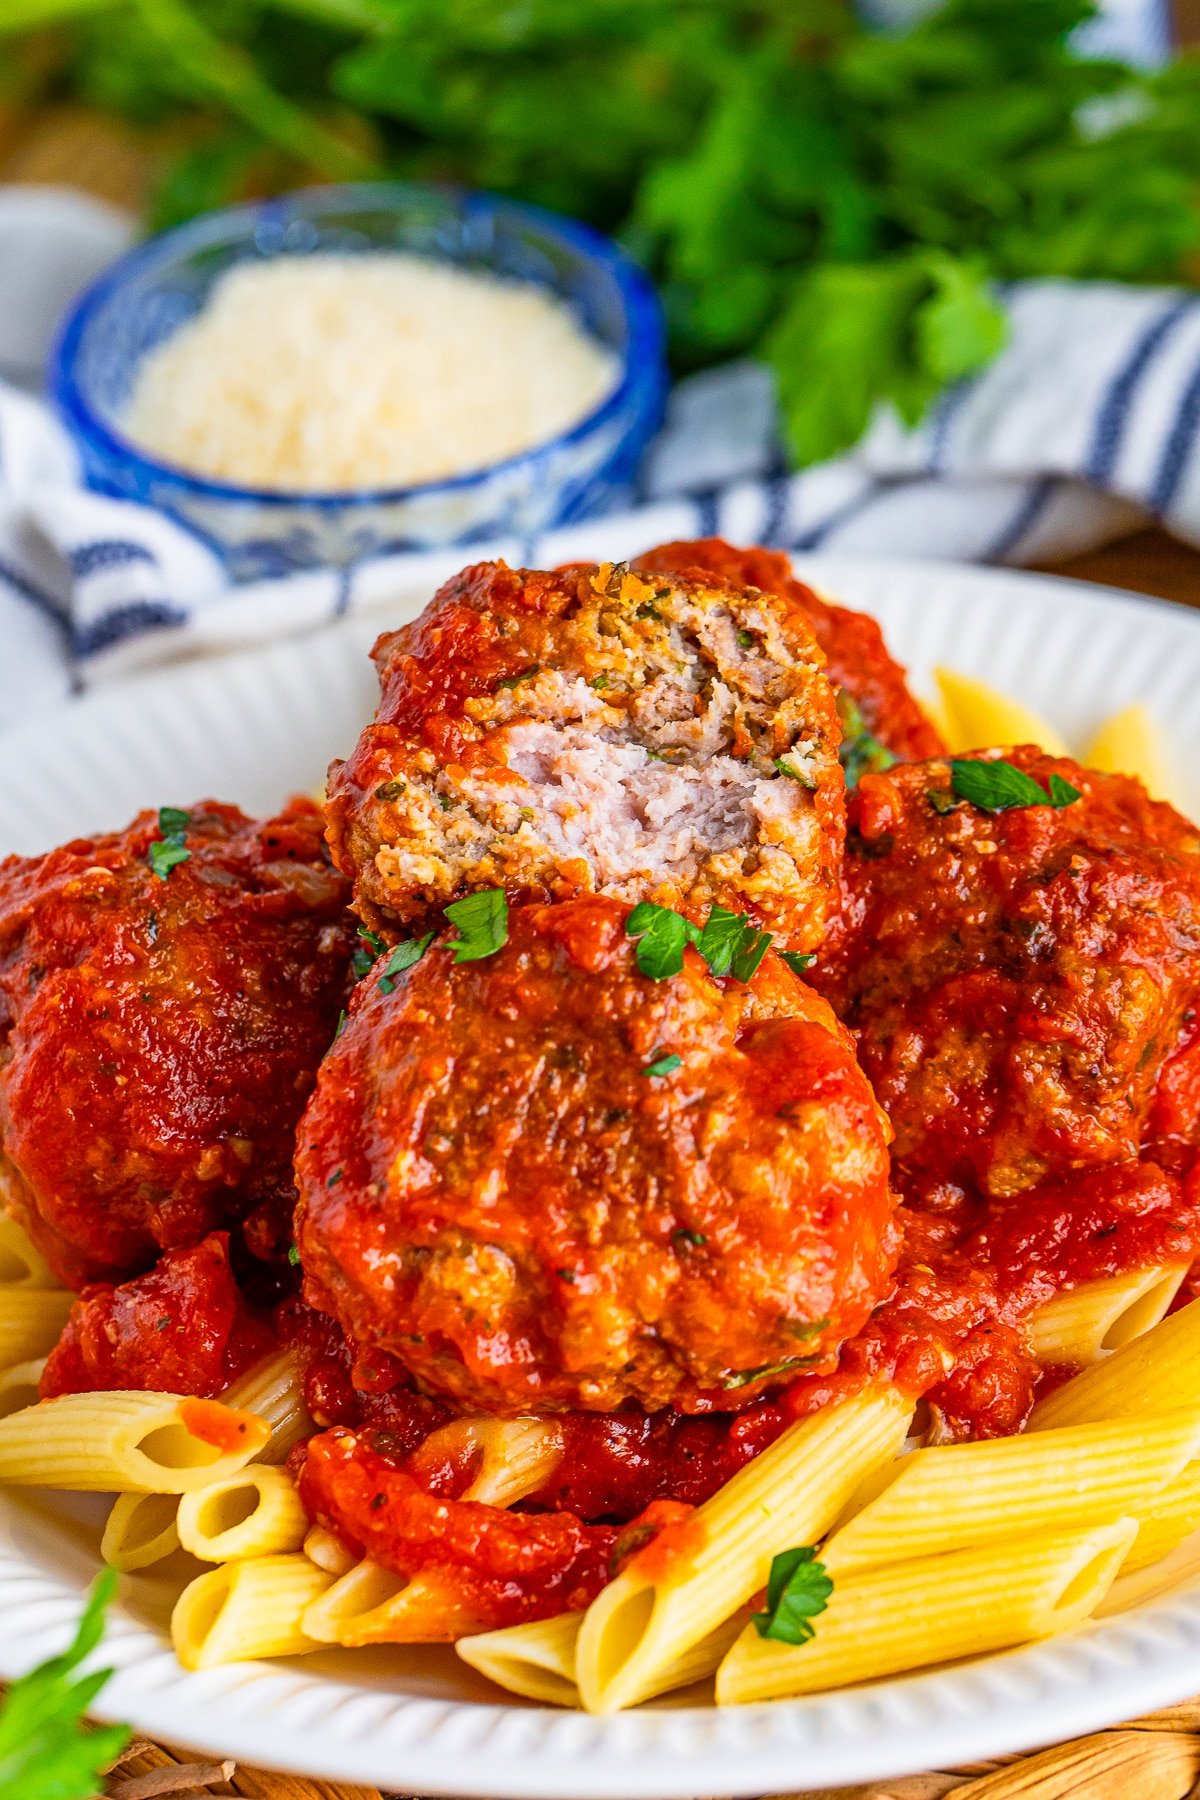 Italian Meatball Recipe with a bite taken out stacked on more meatballs